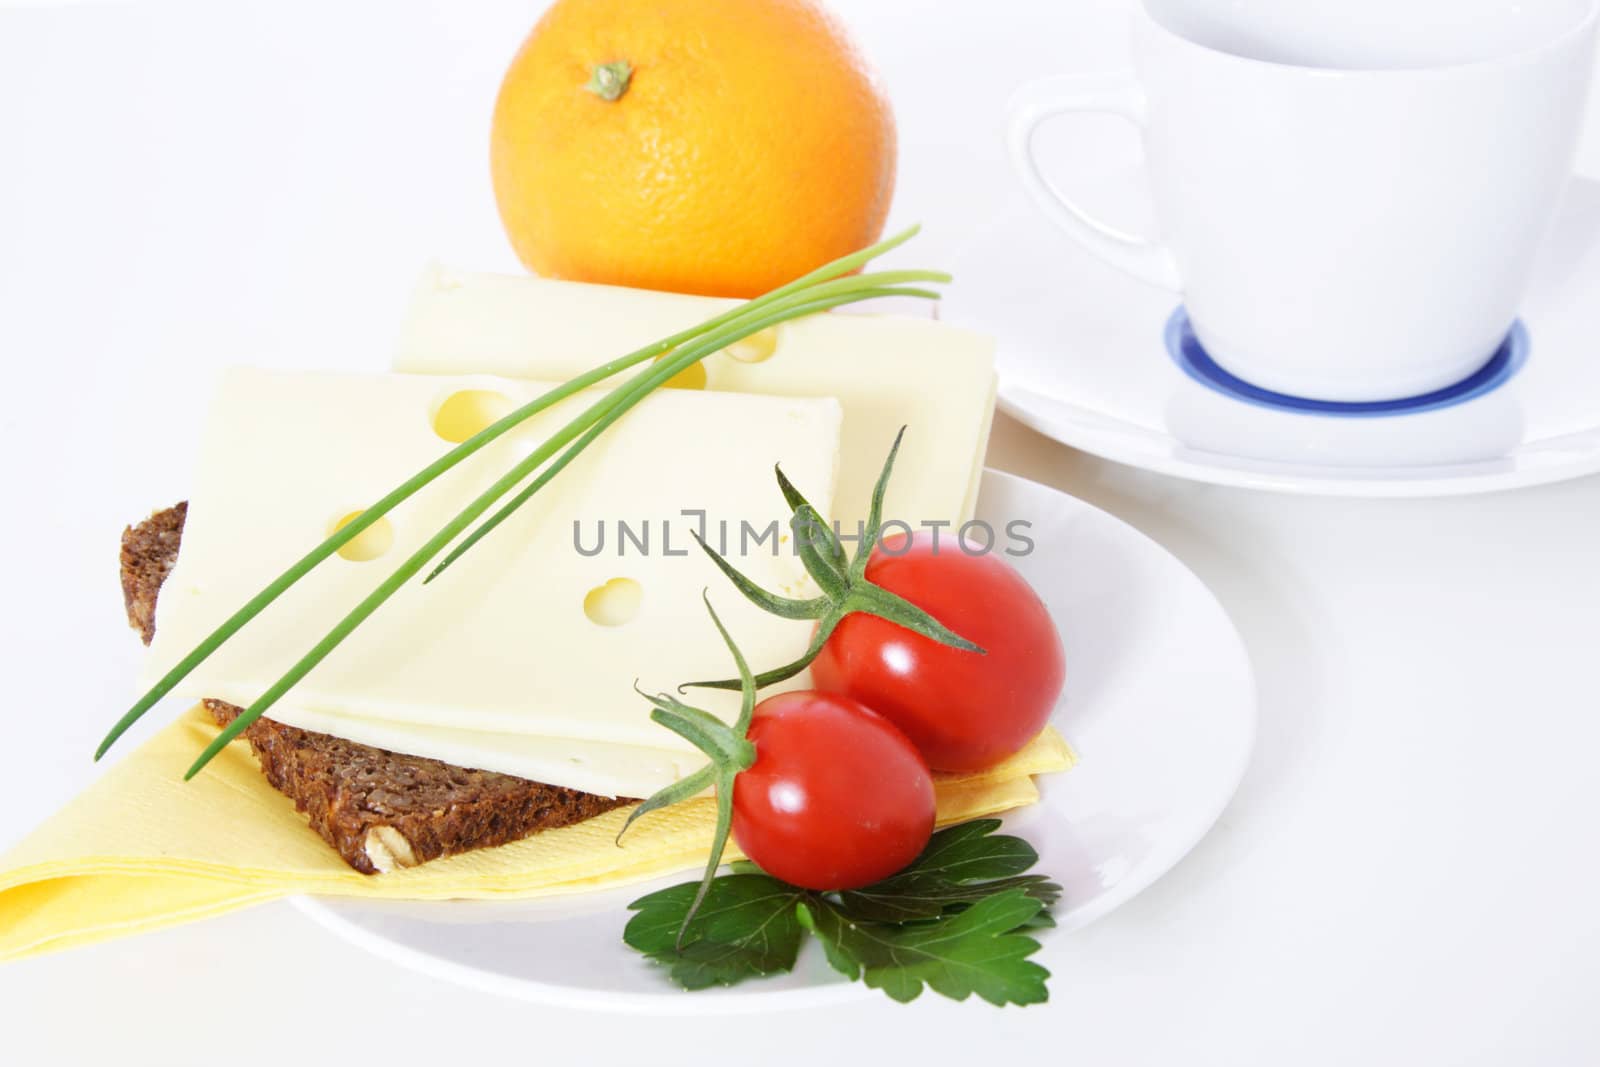 Fine served granary bread with cheese. All on white background.